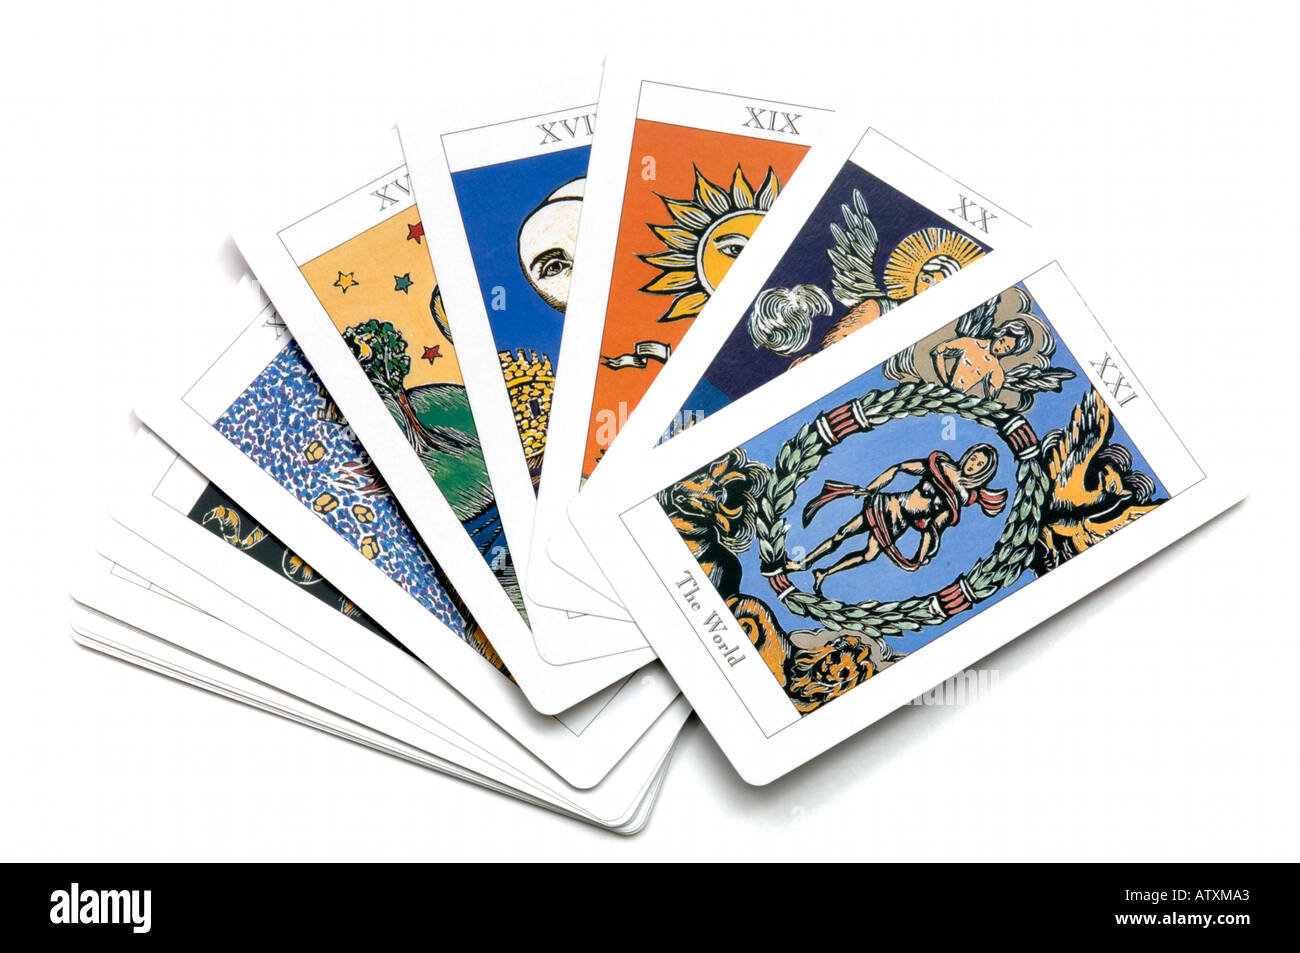 Fanned out deck of tarot cards on white background Stock Photo - Alamy